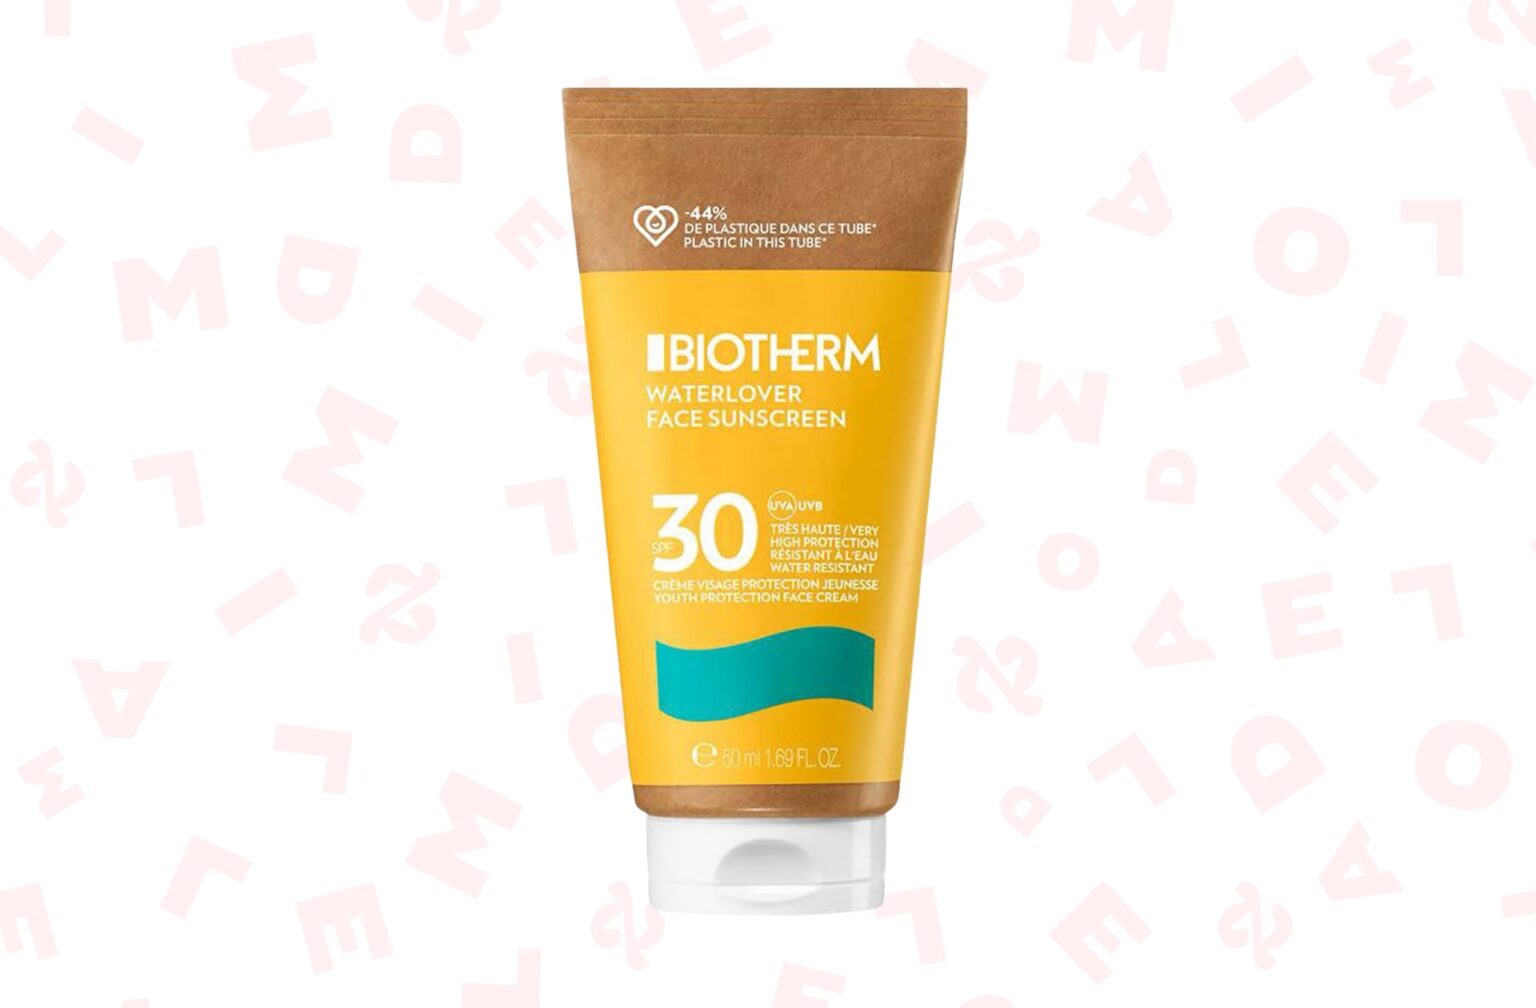 solaire-waterlover-biotherm